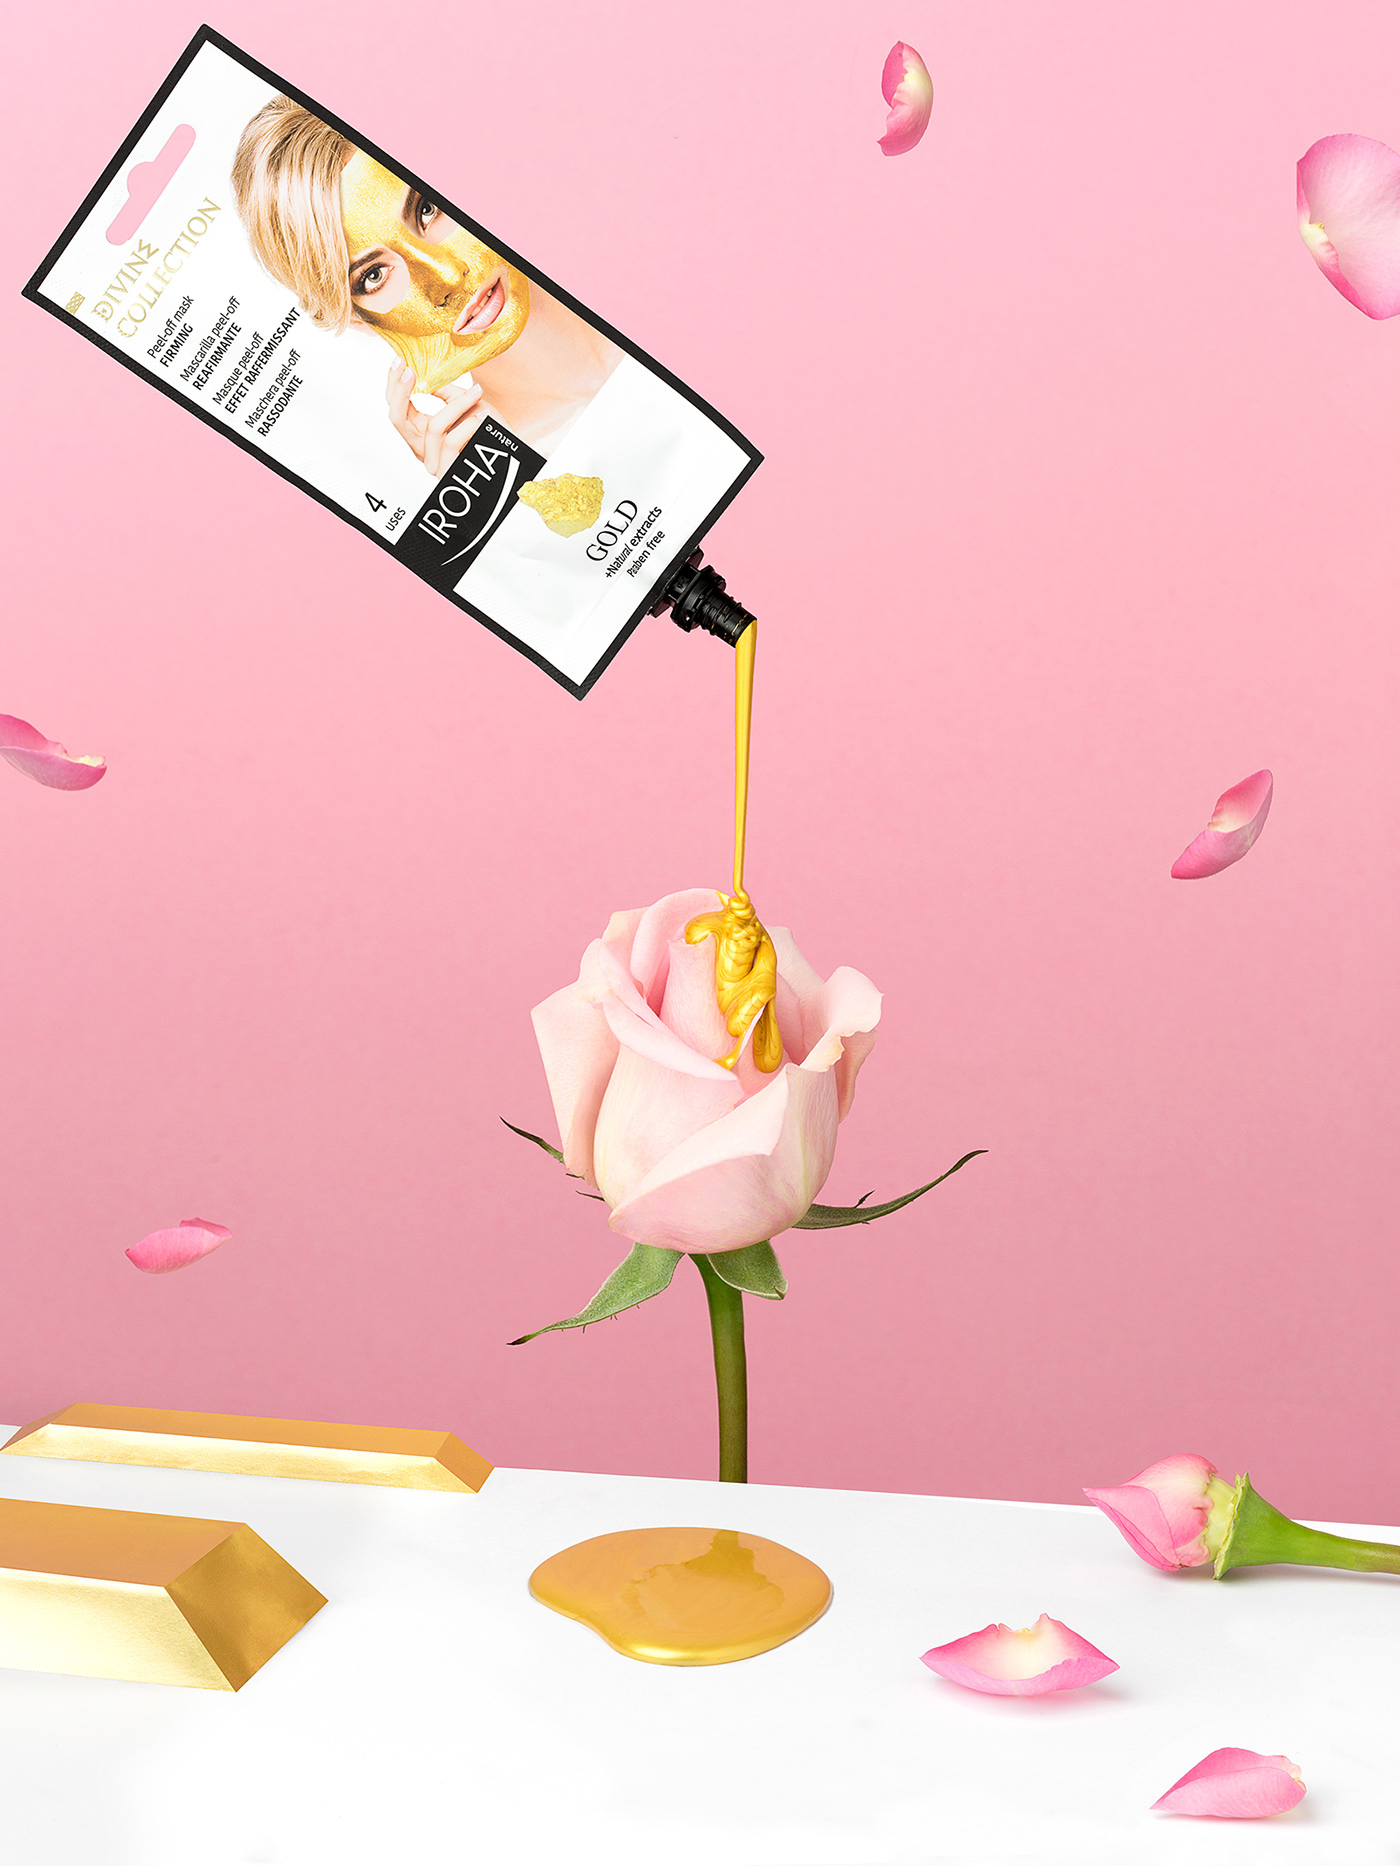 Colorful & playful advertising campaign: Golden peel off mask pouring over a rose